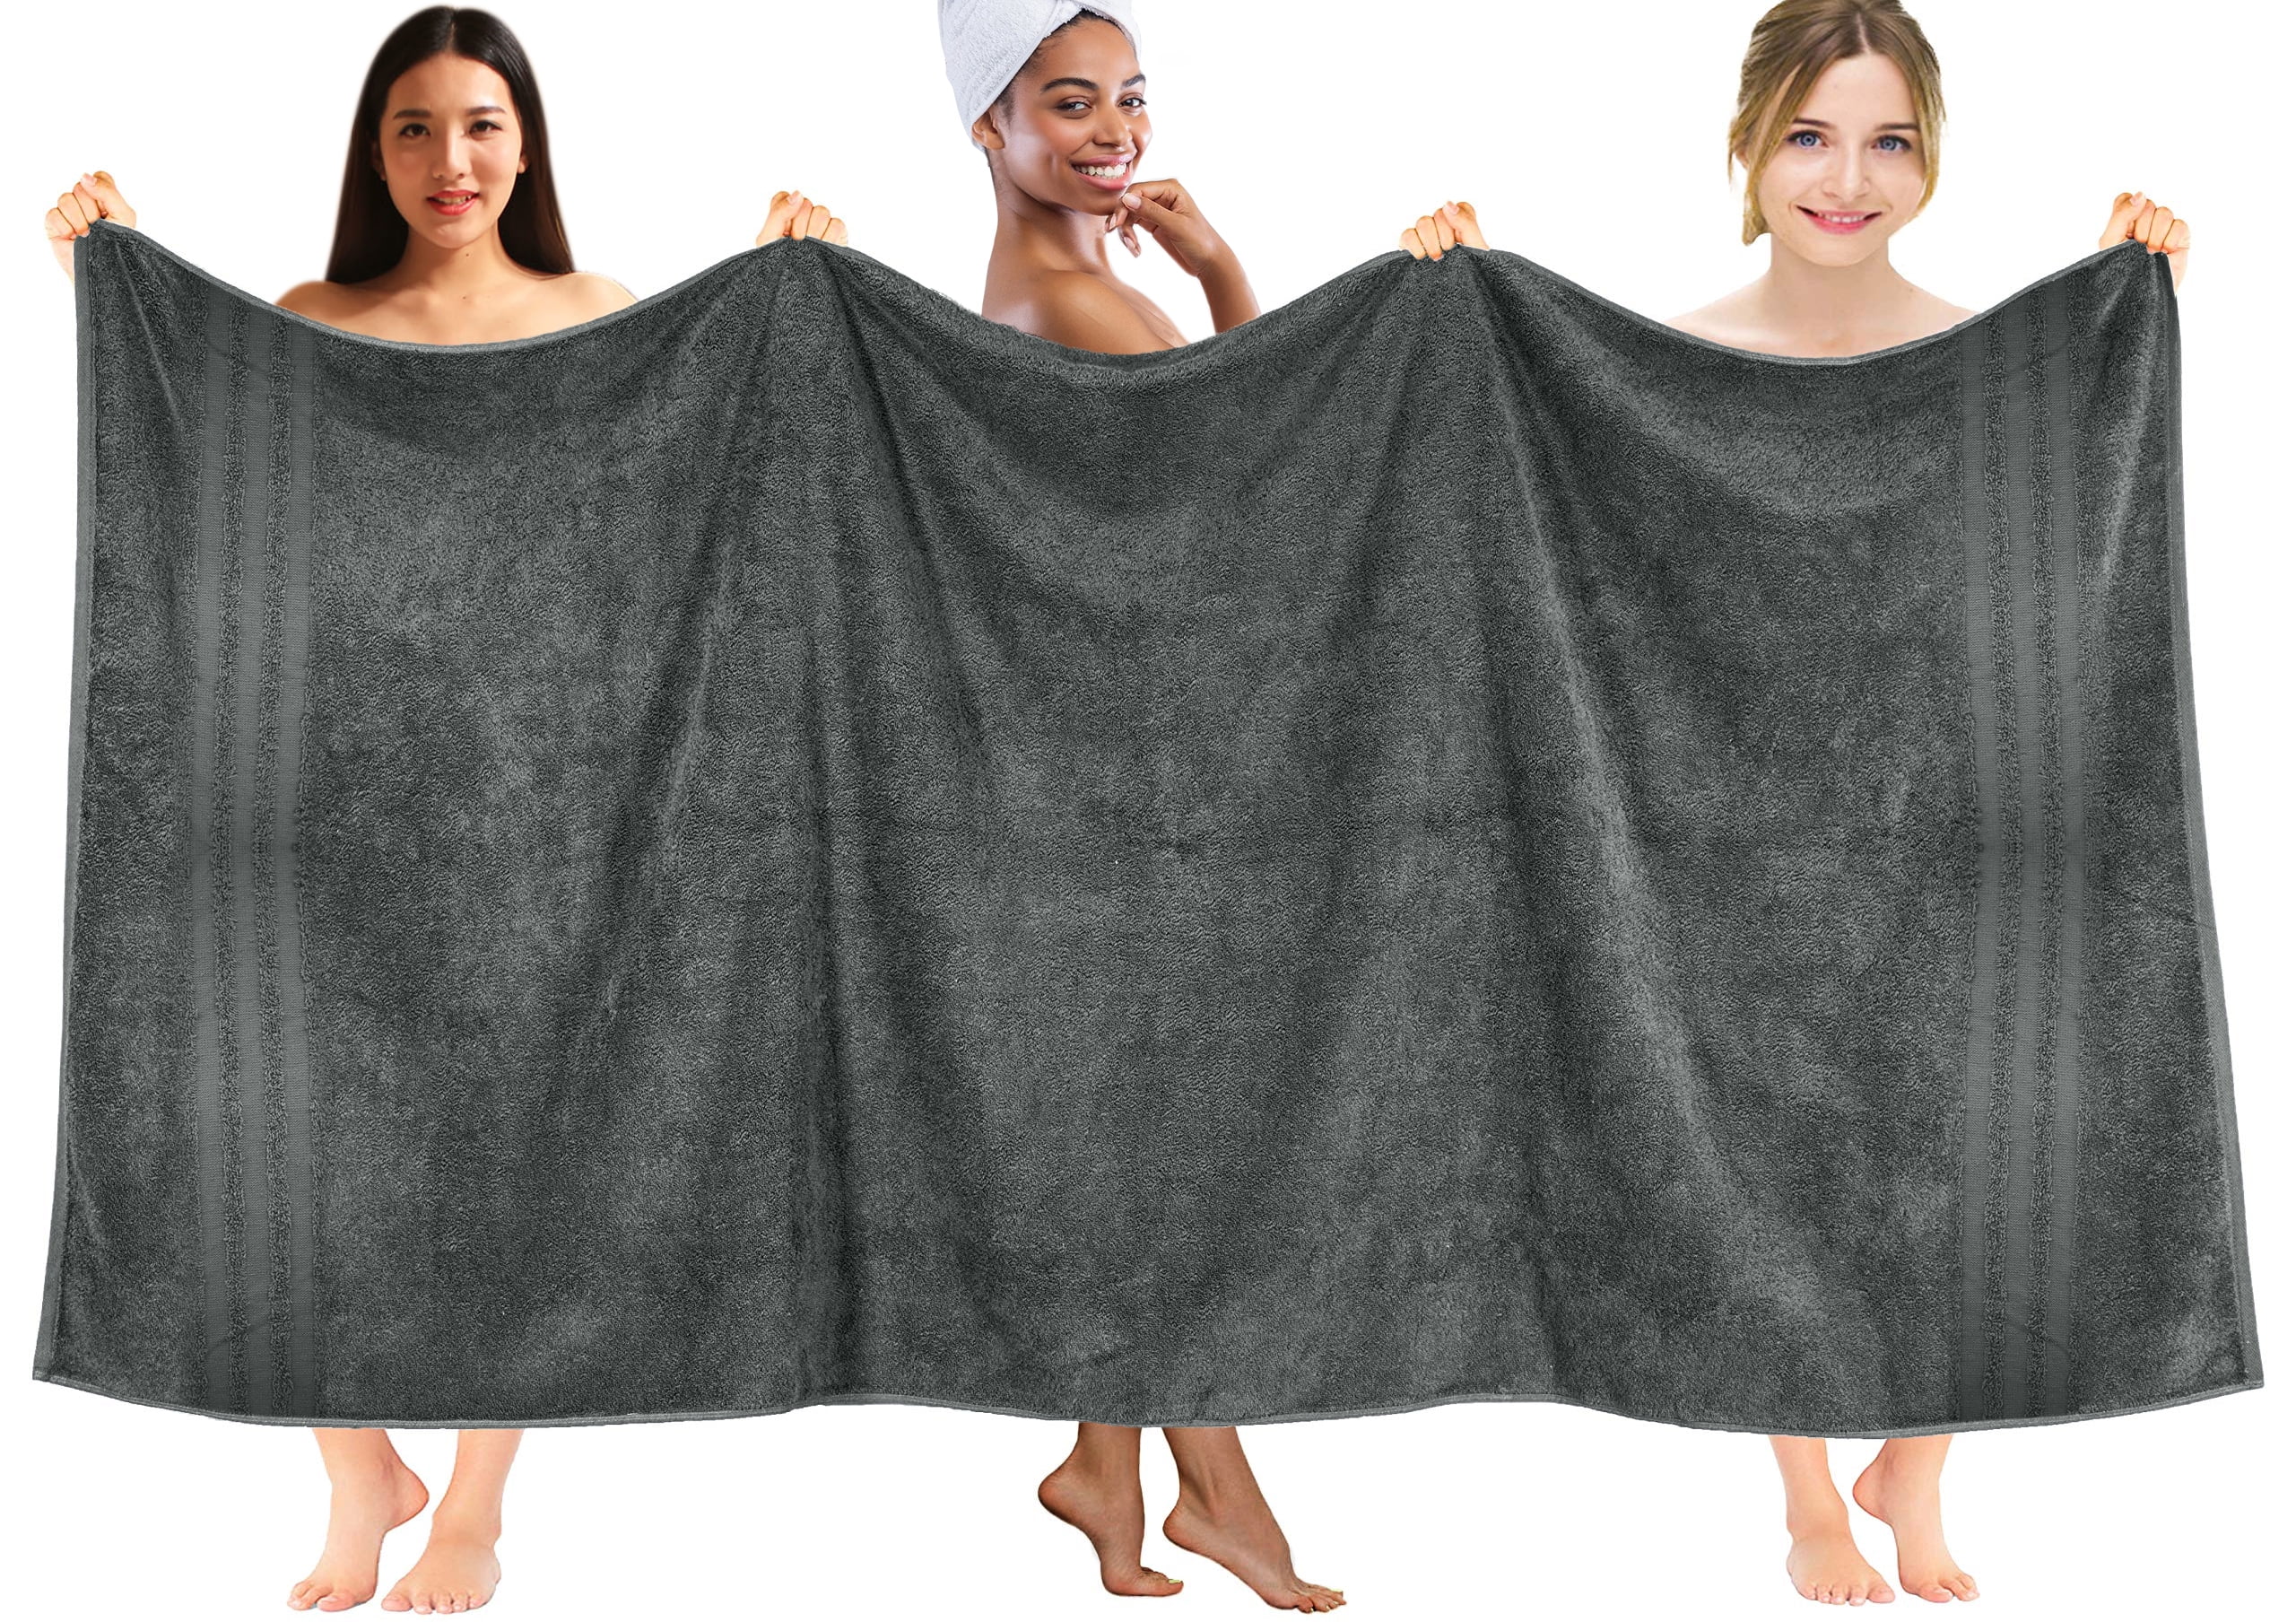 DAN RIVER 100% Cotton Luxury Oversized Bath Towel 40”x80” Clearance Pack of  1, Absorbent & Quick Dry Extra-Large Bath Sheet for Bathroom, Hotel, Spa,  Beach, Pool, Gym